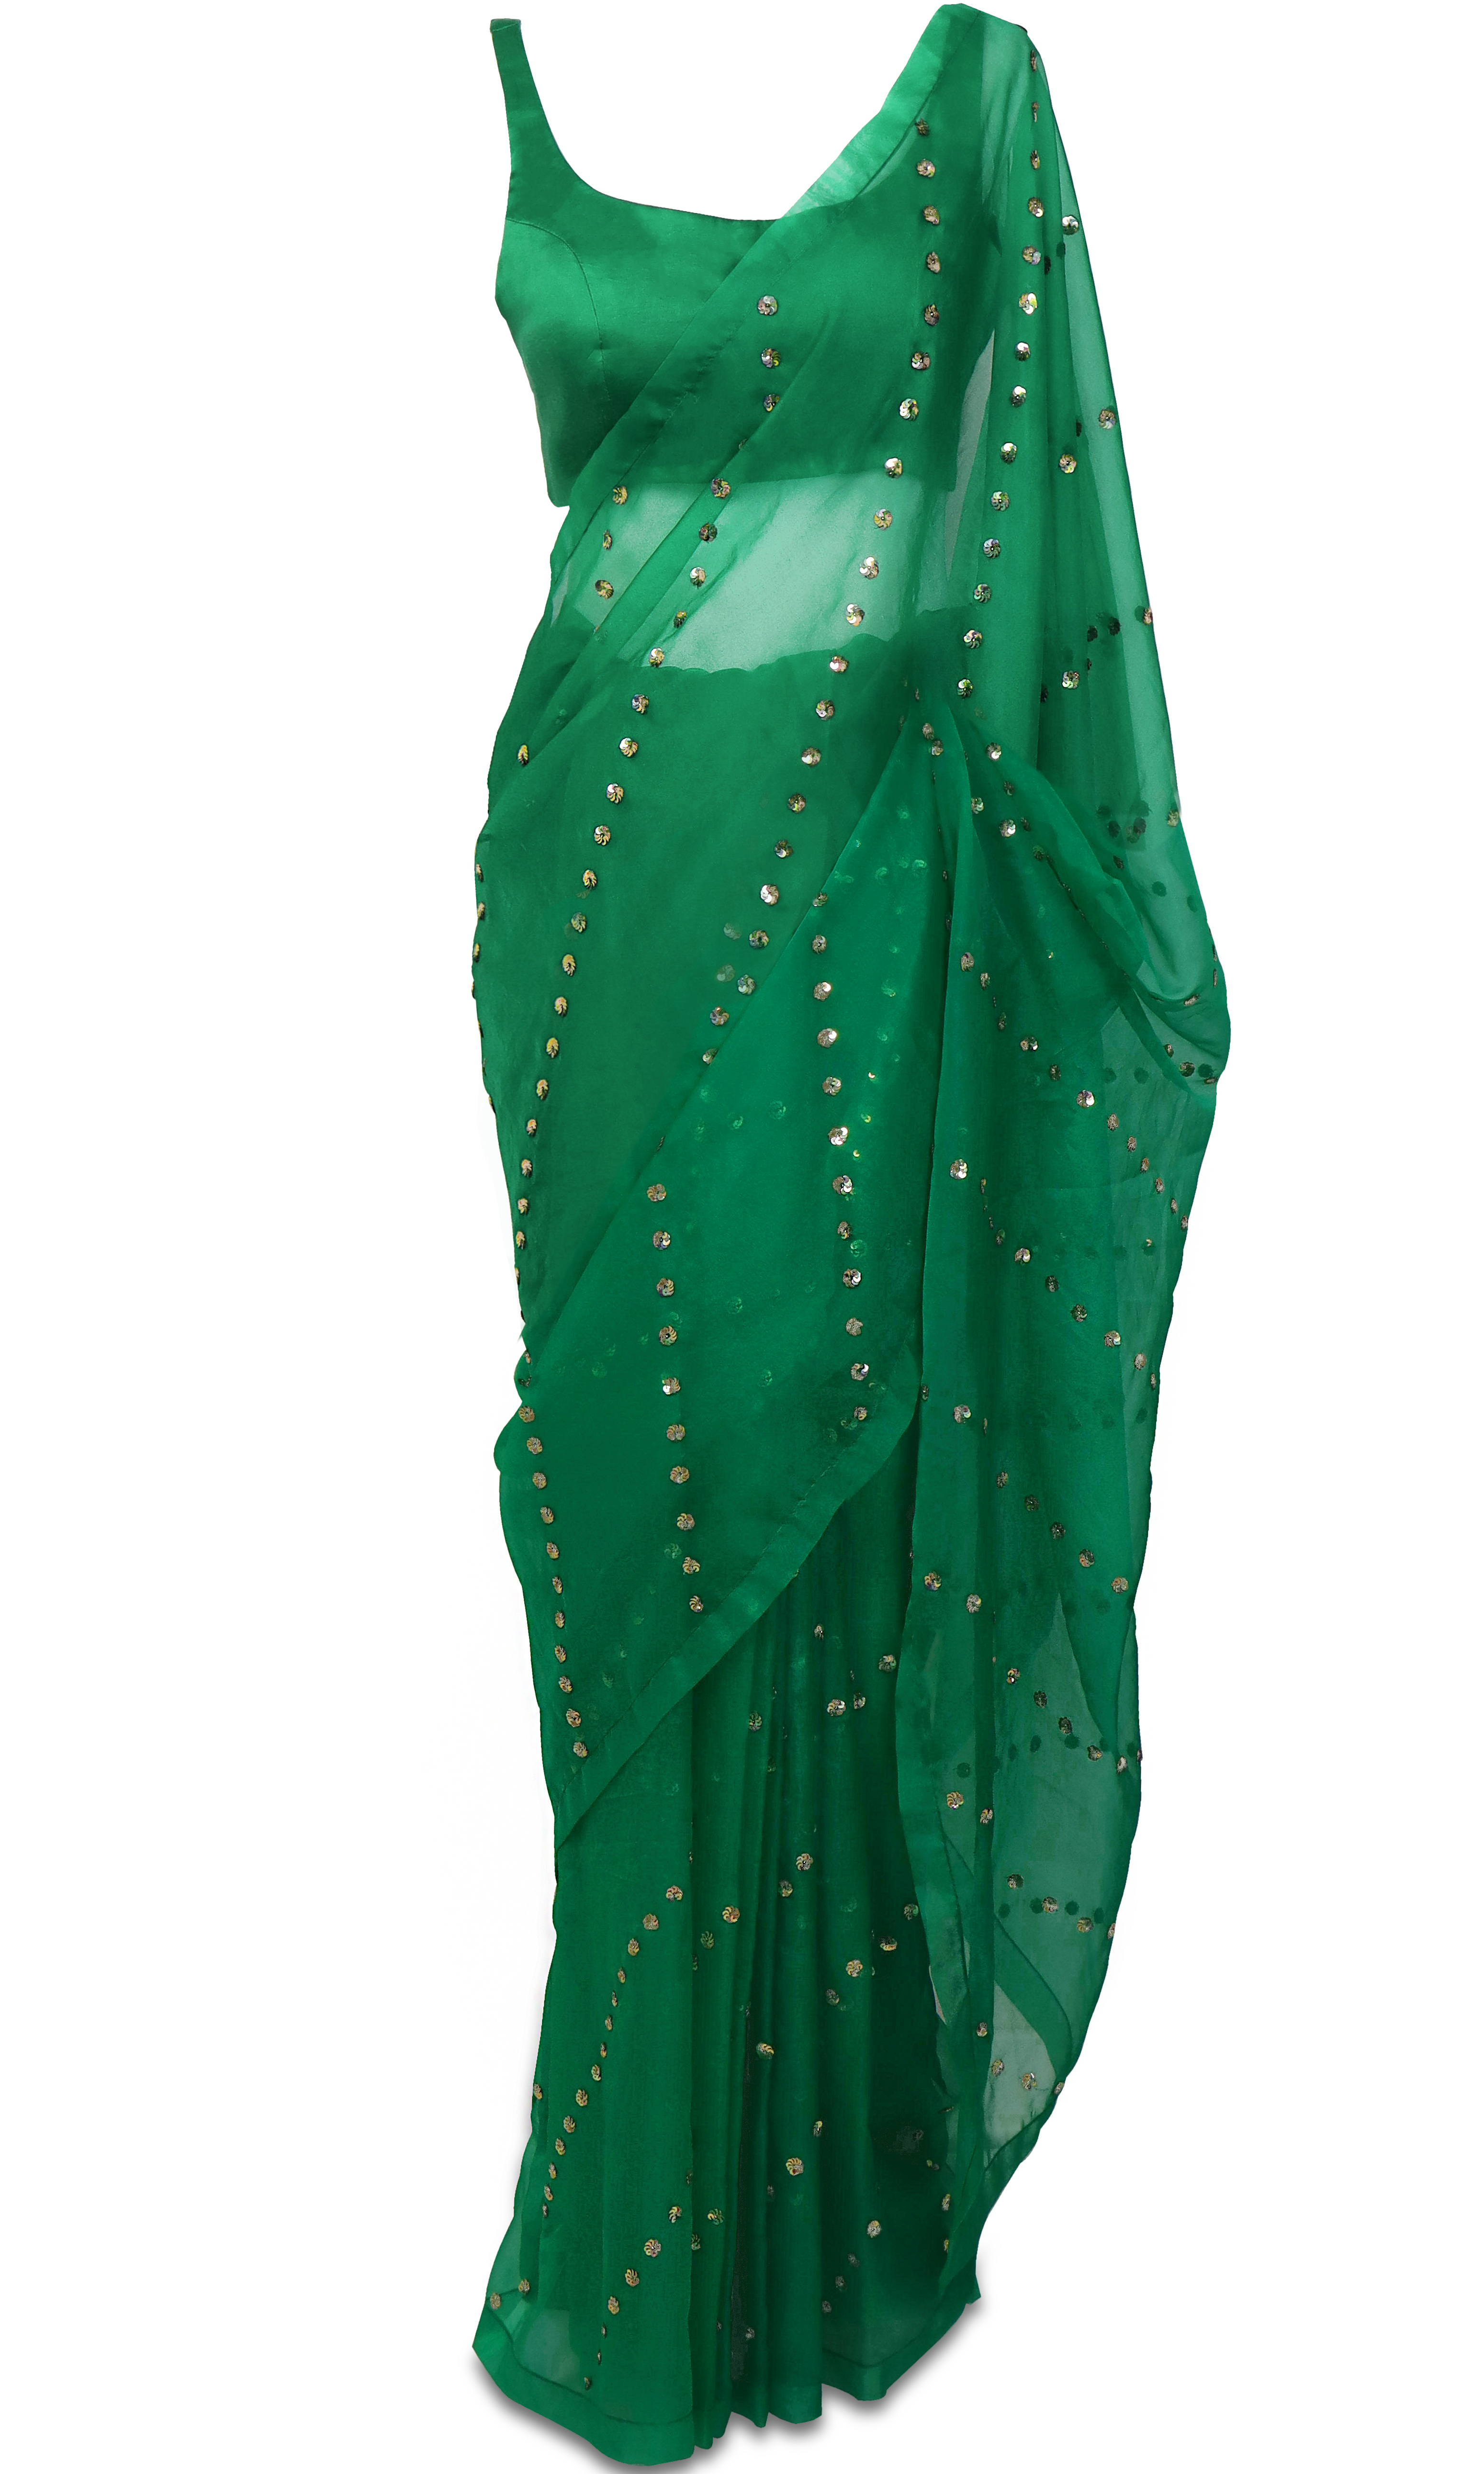 Pre-pleated emerald green saree with silk organza base & matching green satin blouse by Rania